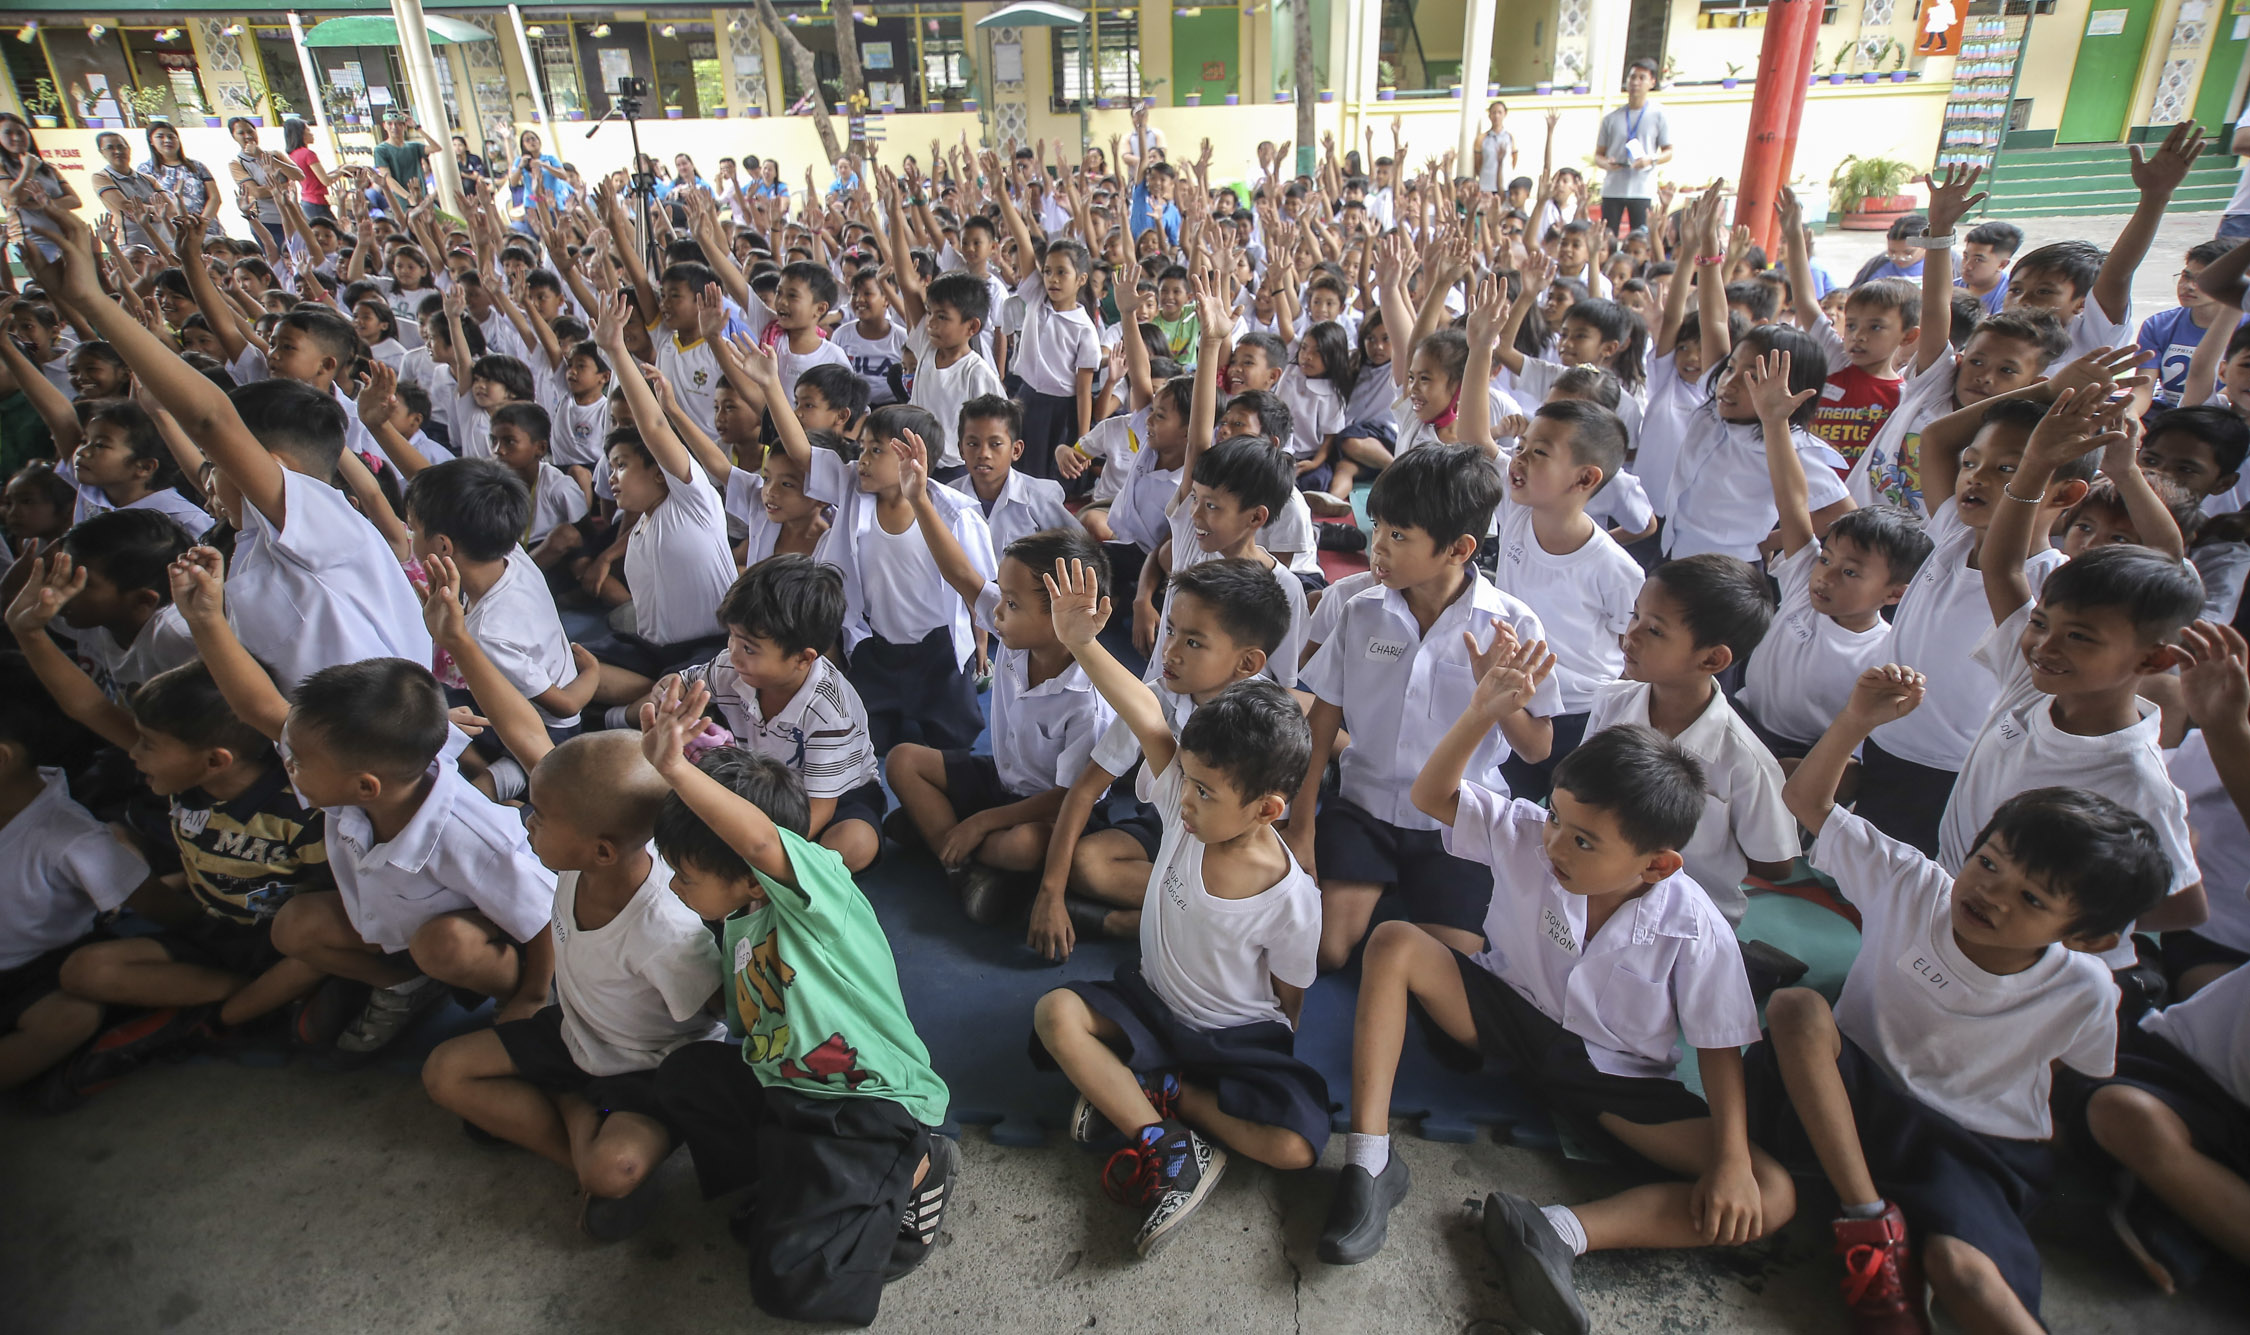 Kids told fables on generosity, kindness at Inquirer Read-Along